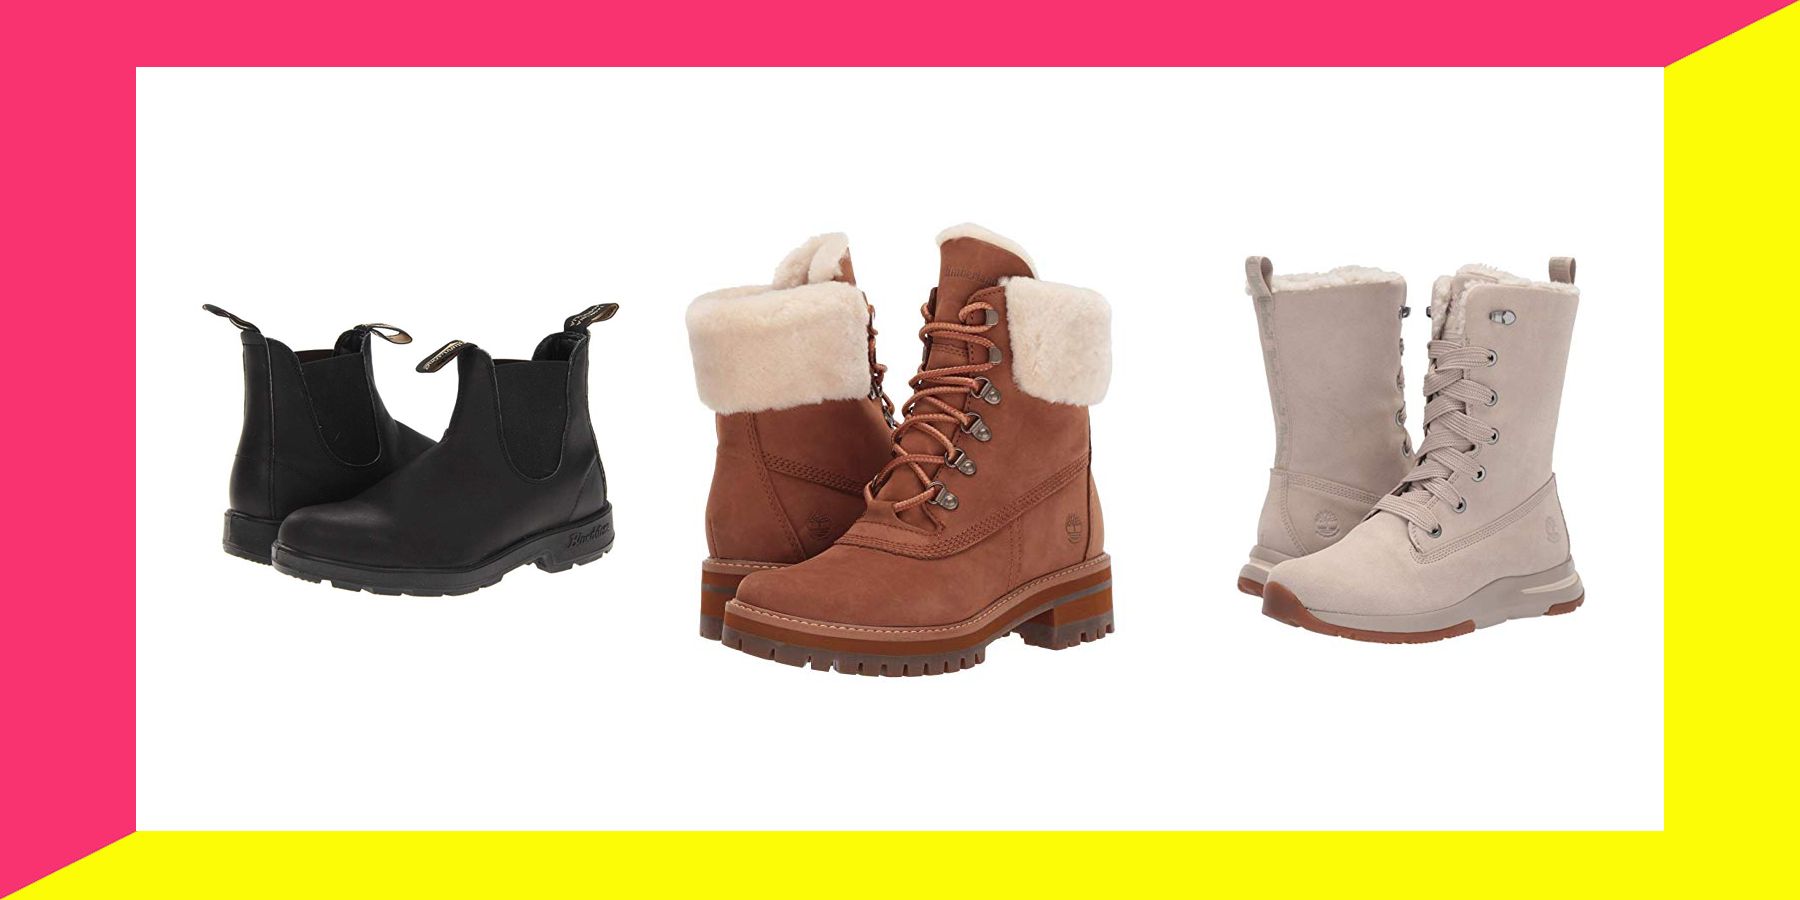 cyber monday deals on timberland boots